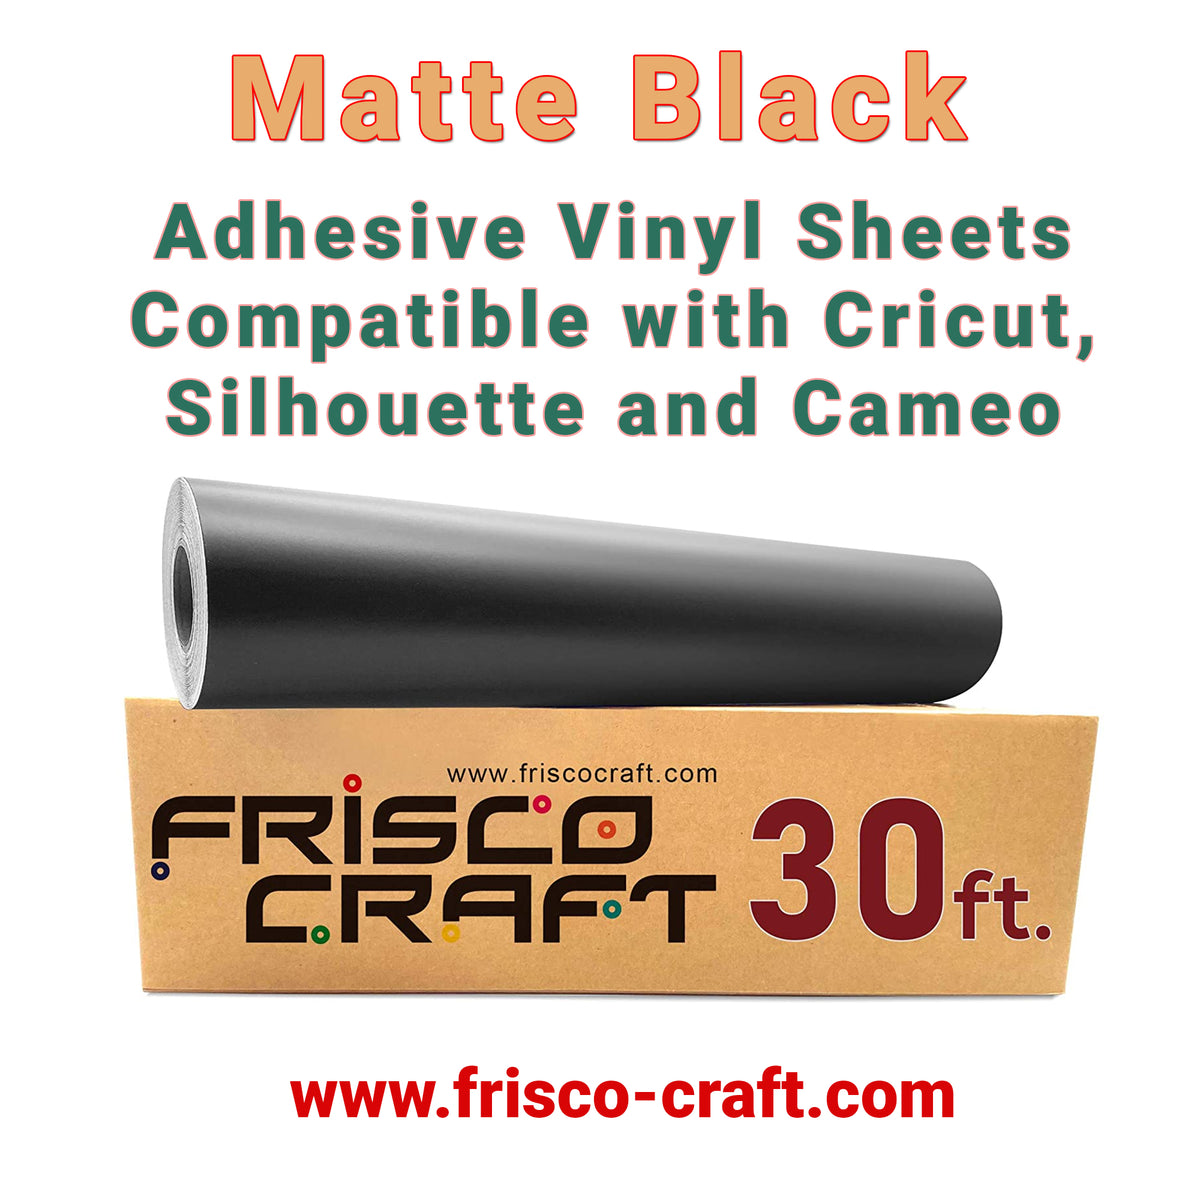  Frisco Craft Stencil Vinyl, Blue Vinyl Sheets for Cutting  Machine - 12 x 60 FT Adhesive Roll Cricut, Silhouette, Cameo Cutters,  Signs, Scrapbooking, Craft, Die Cutters : Arts, Crafts & Sewing